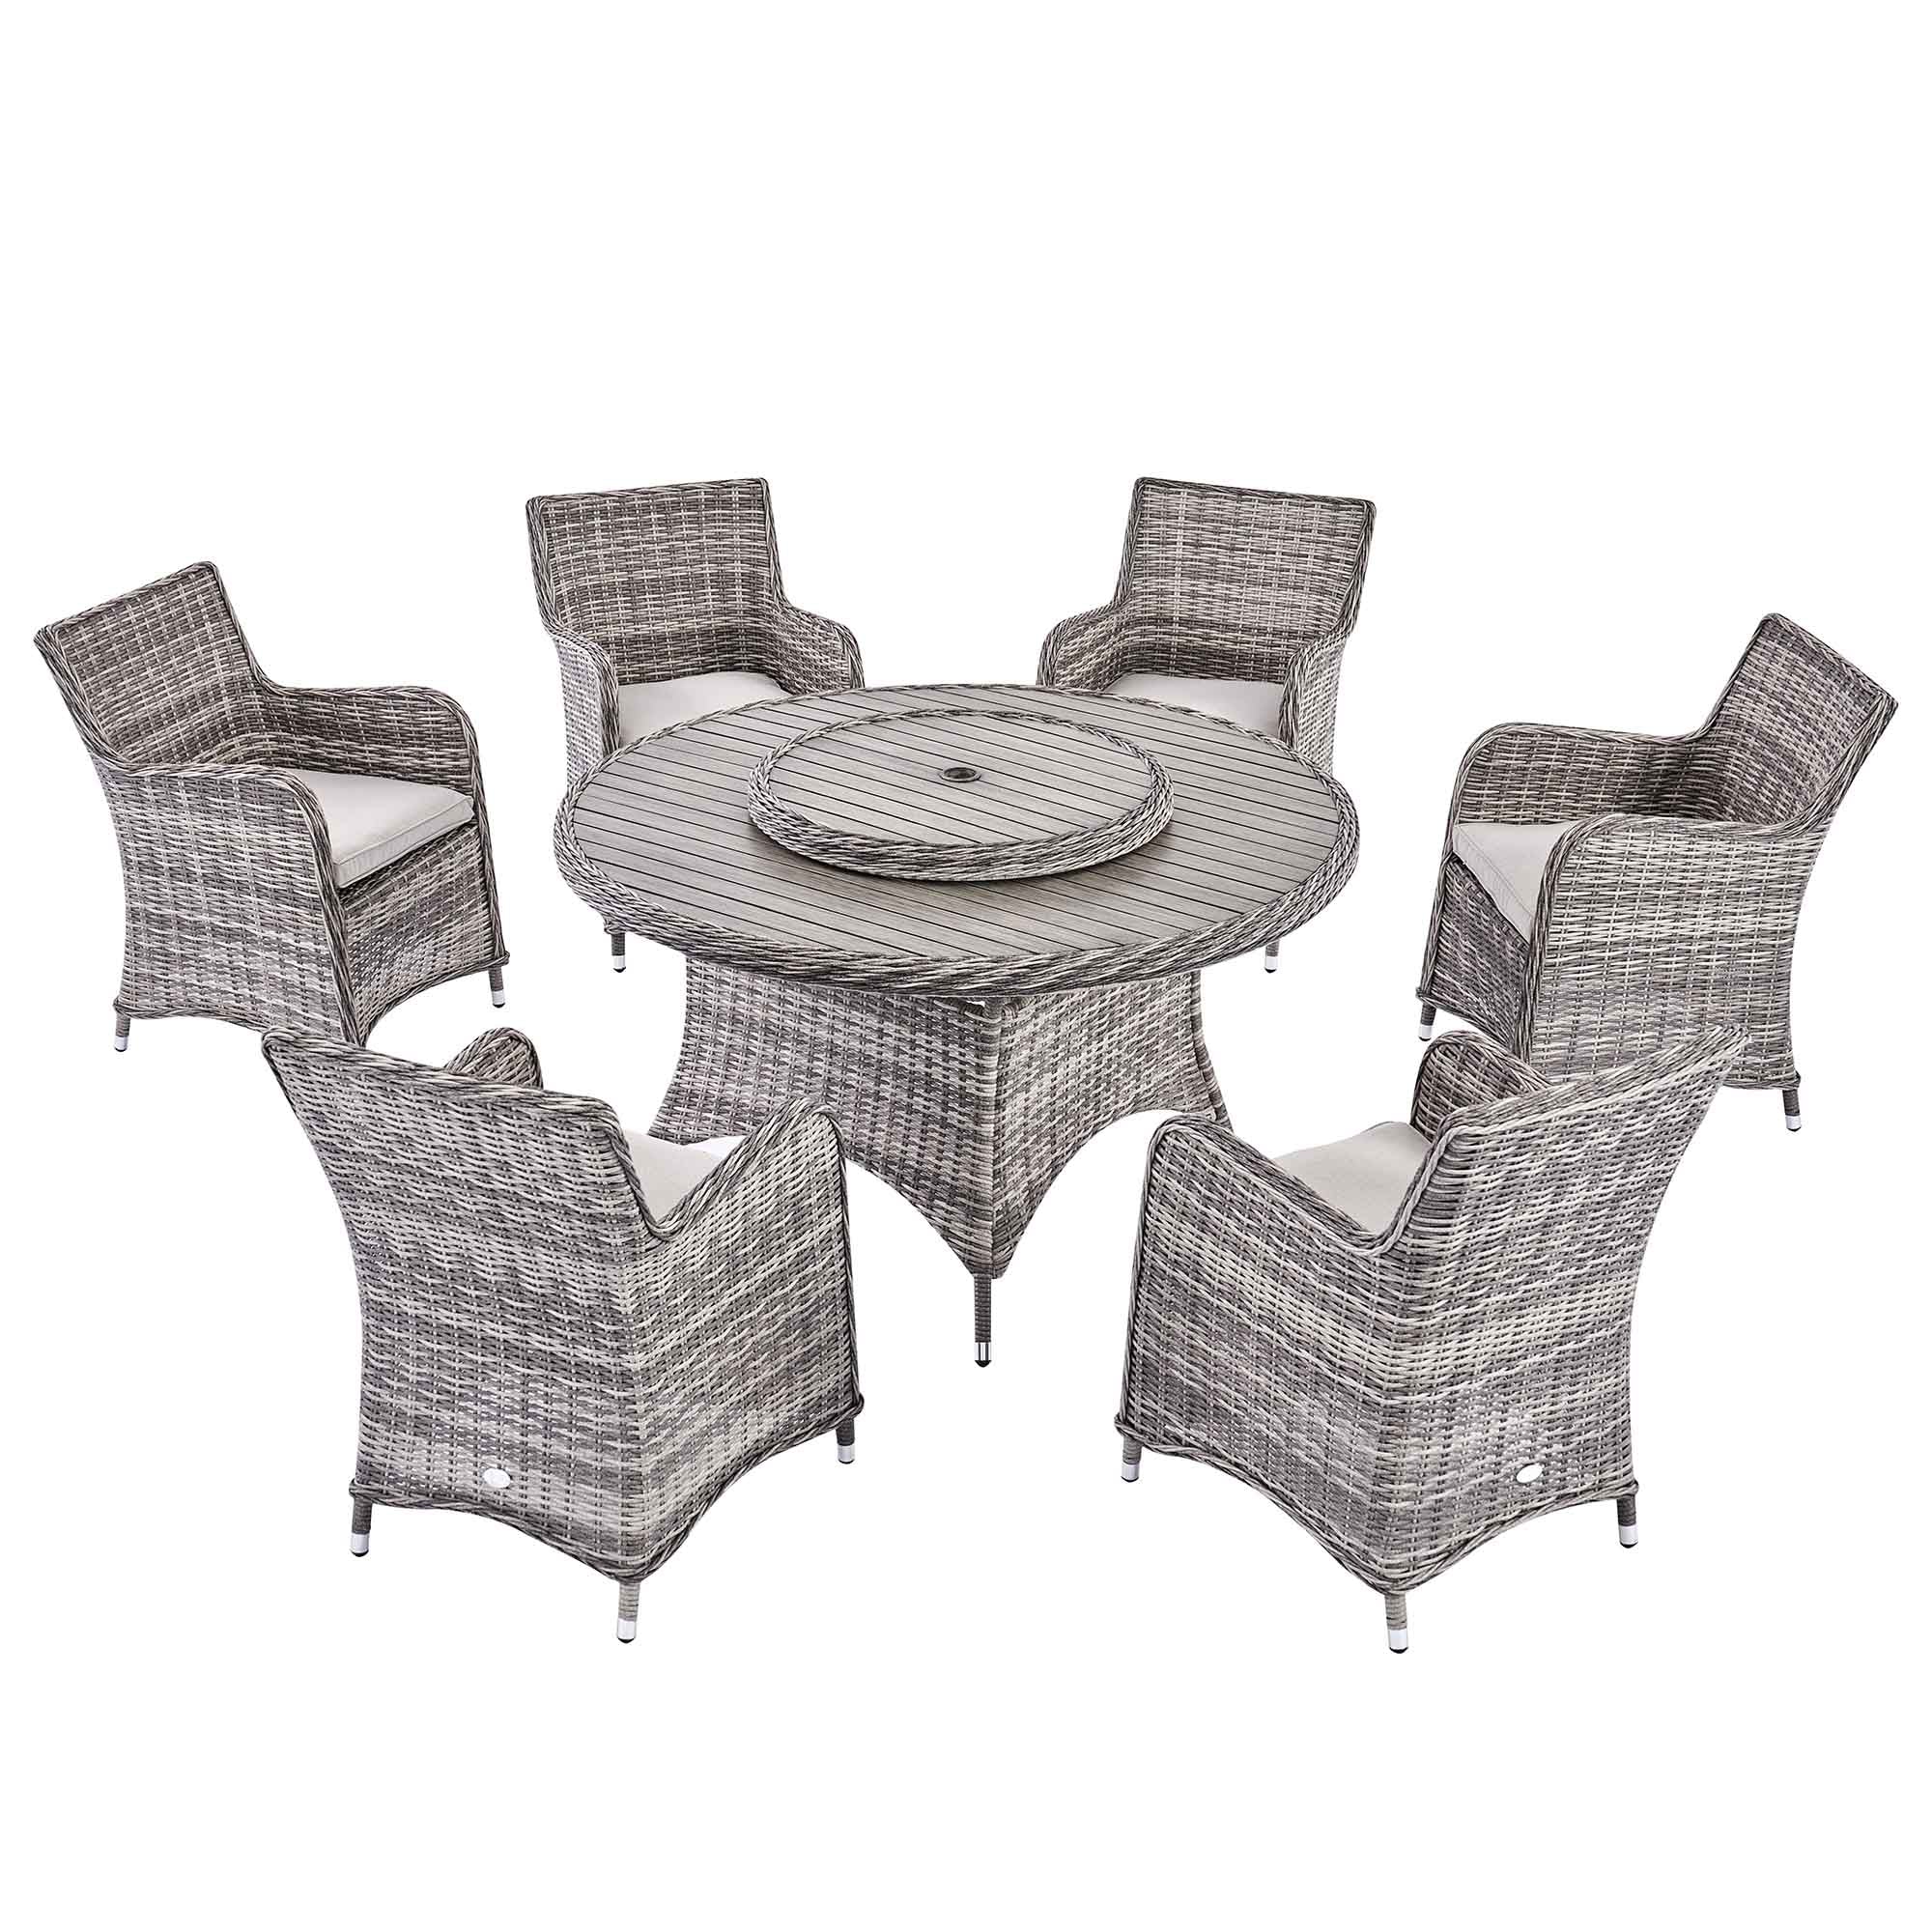 Hampshire 6-Seater Round Wicker Rattan Dining Set with Lazy Susan & Ice Bucket, Light Grey